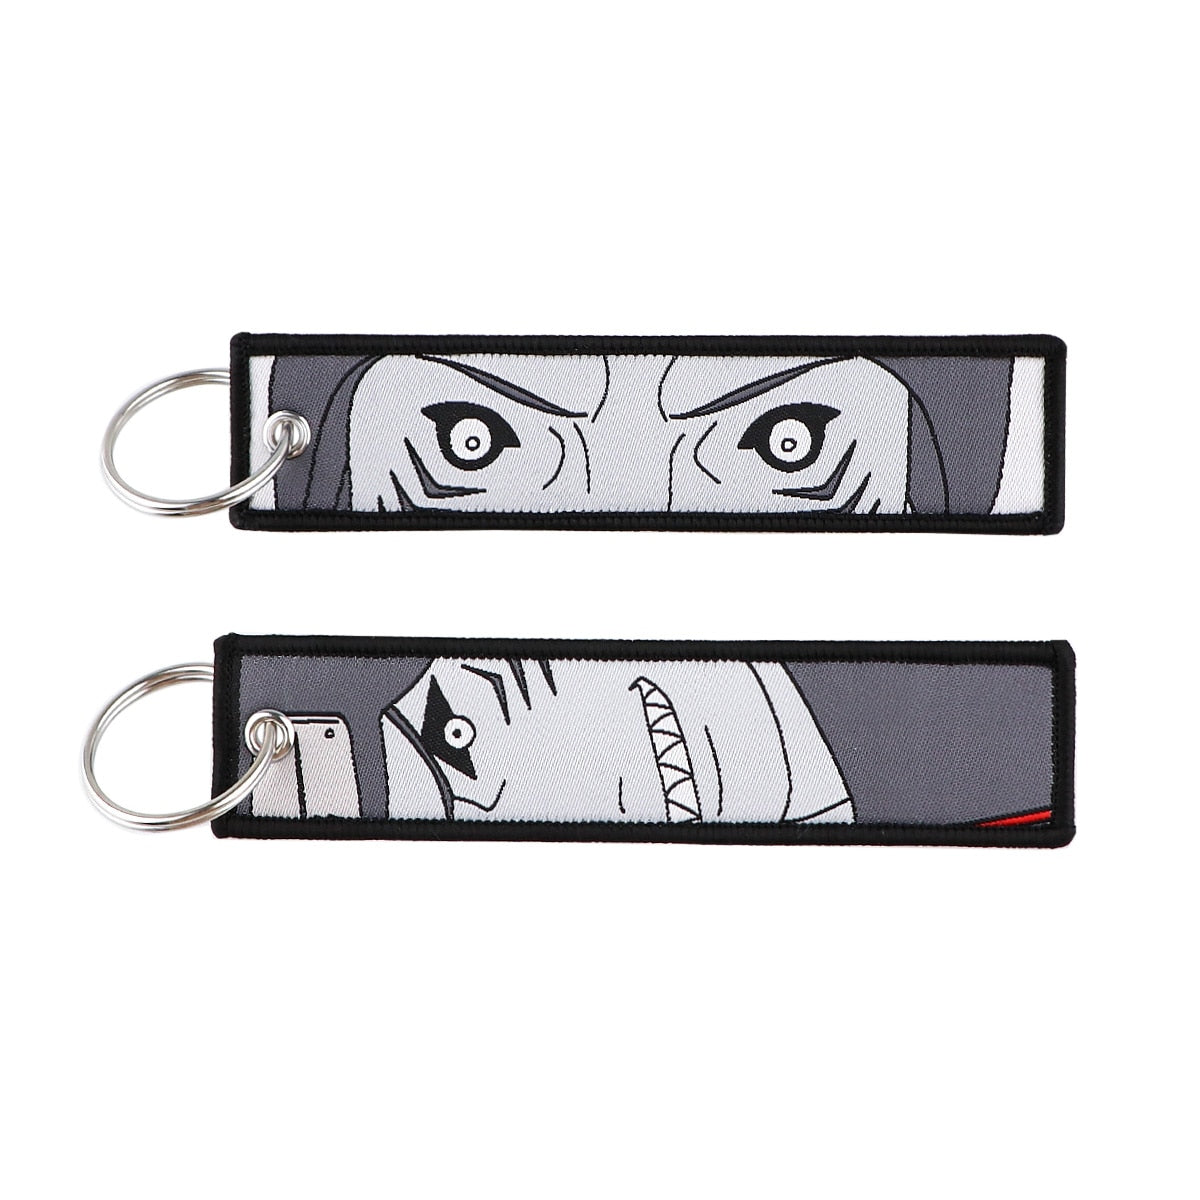 Naruto Embroidered Keychain Key Ring 7